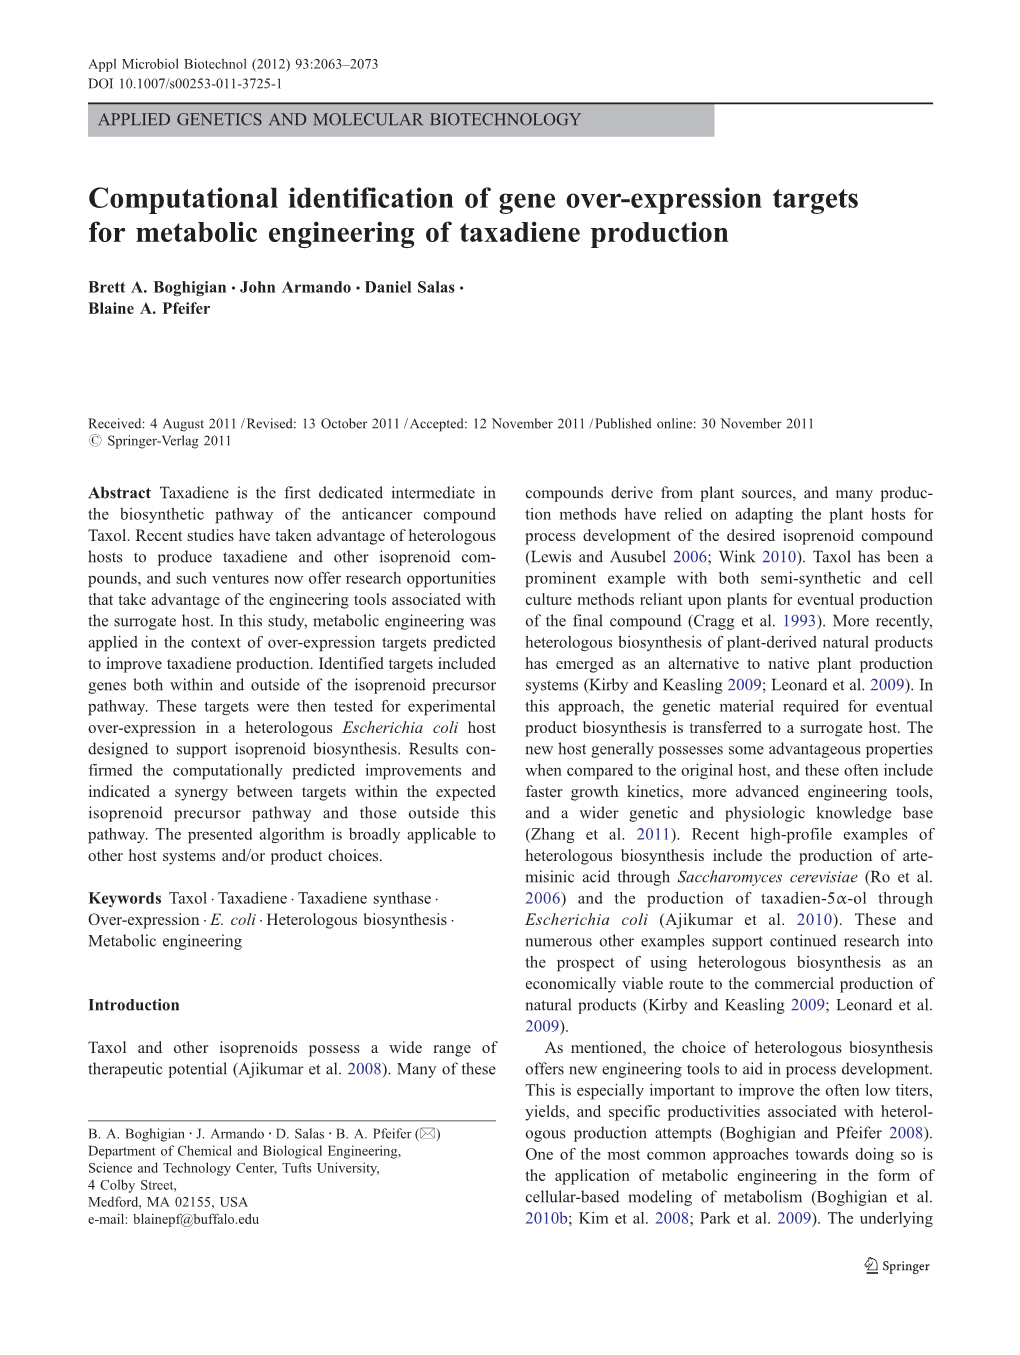 Computational Identification of Gene Over-Expression Targets for Metabolic Engineering of Taxadiene Production